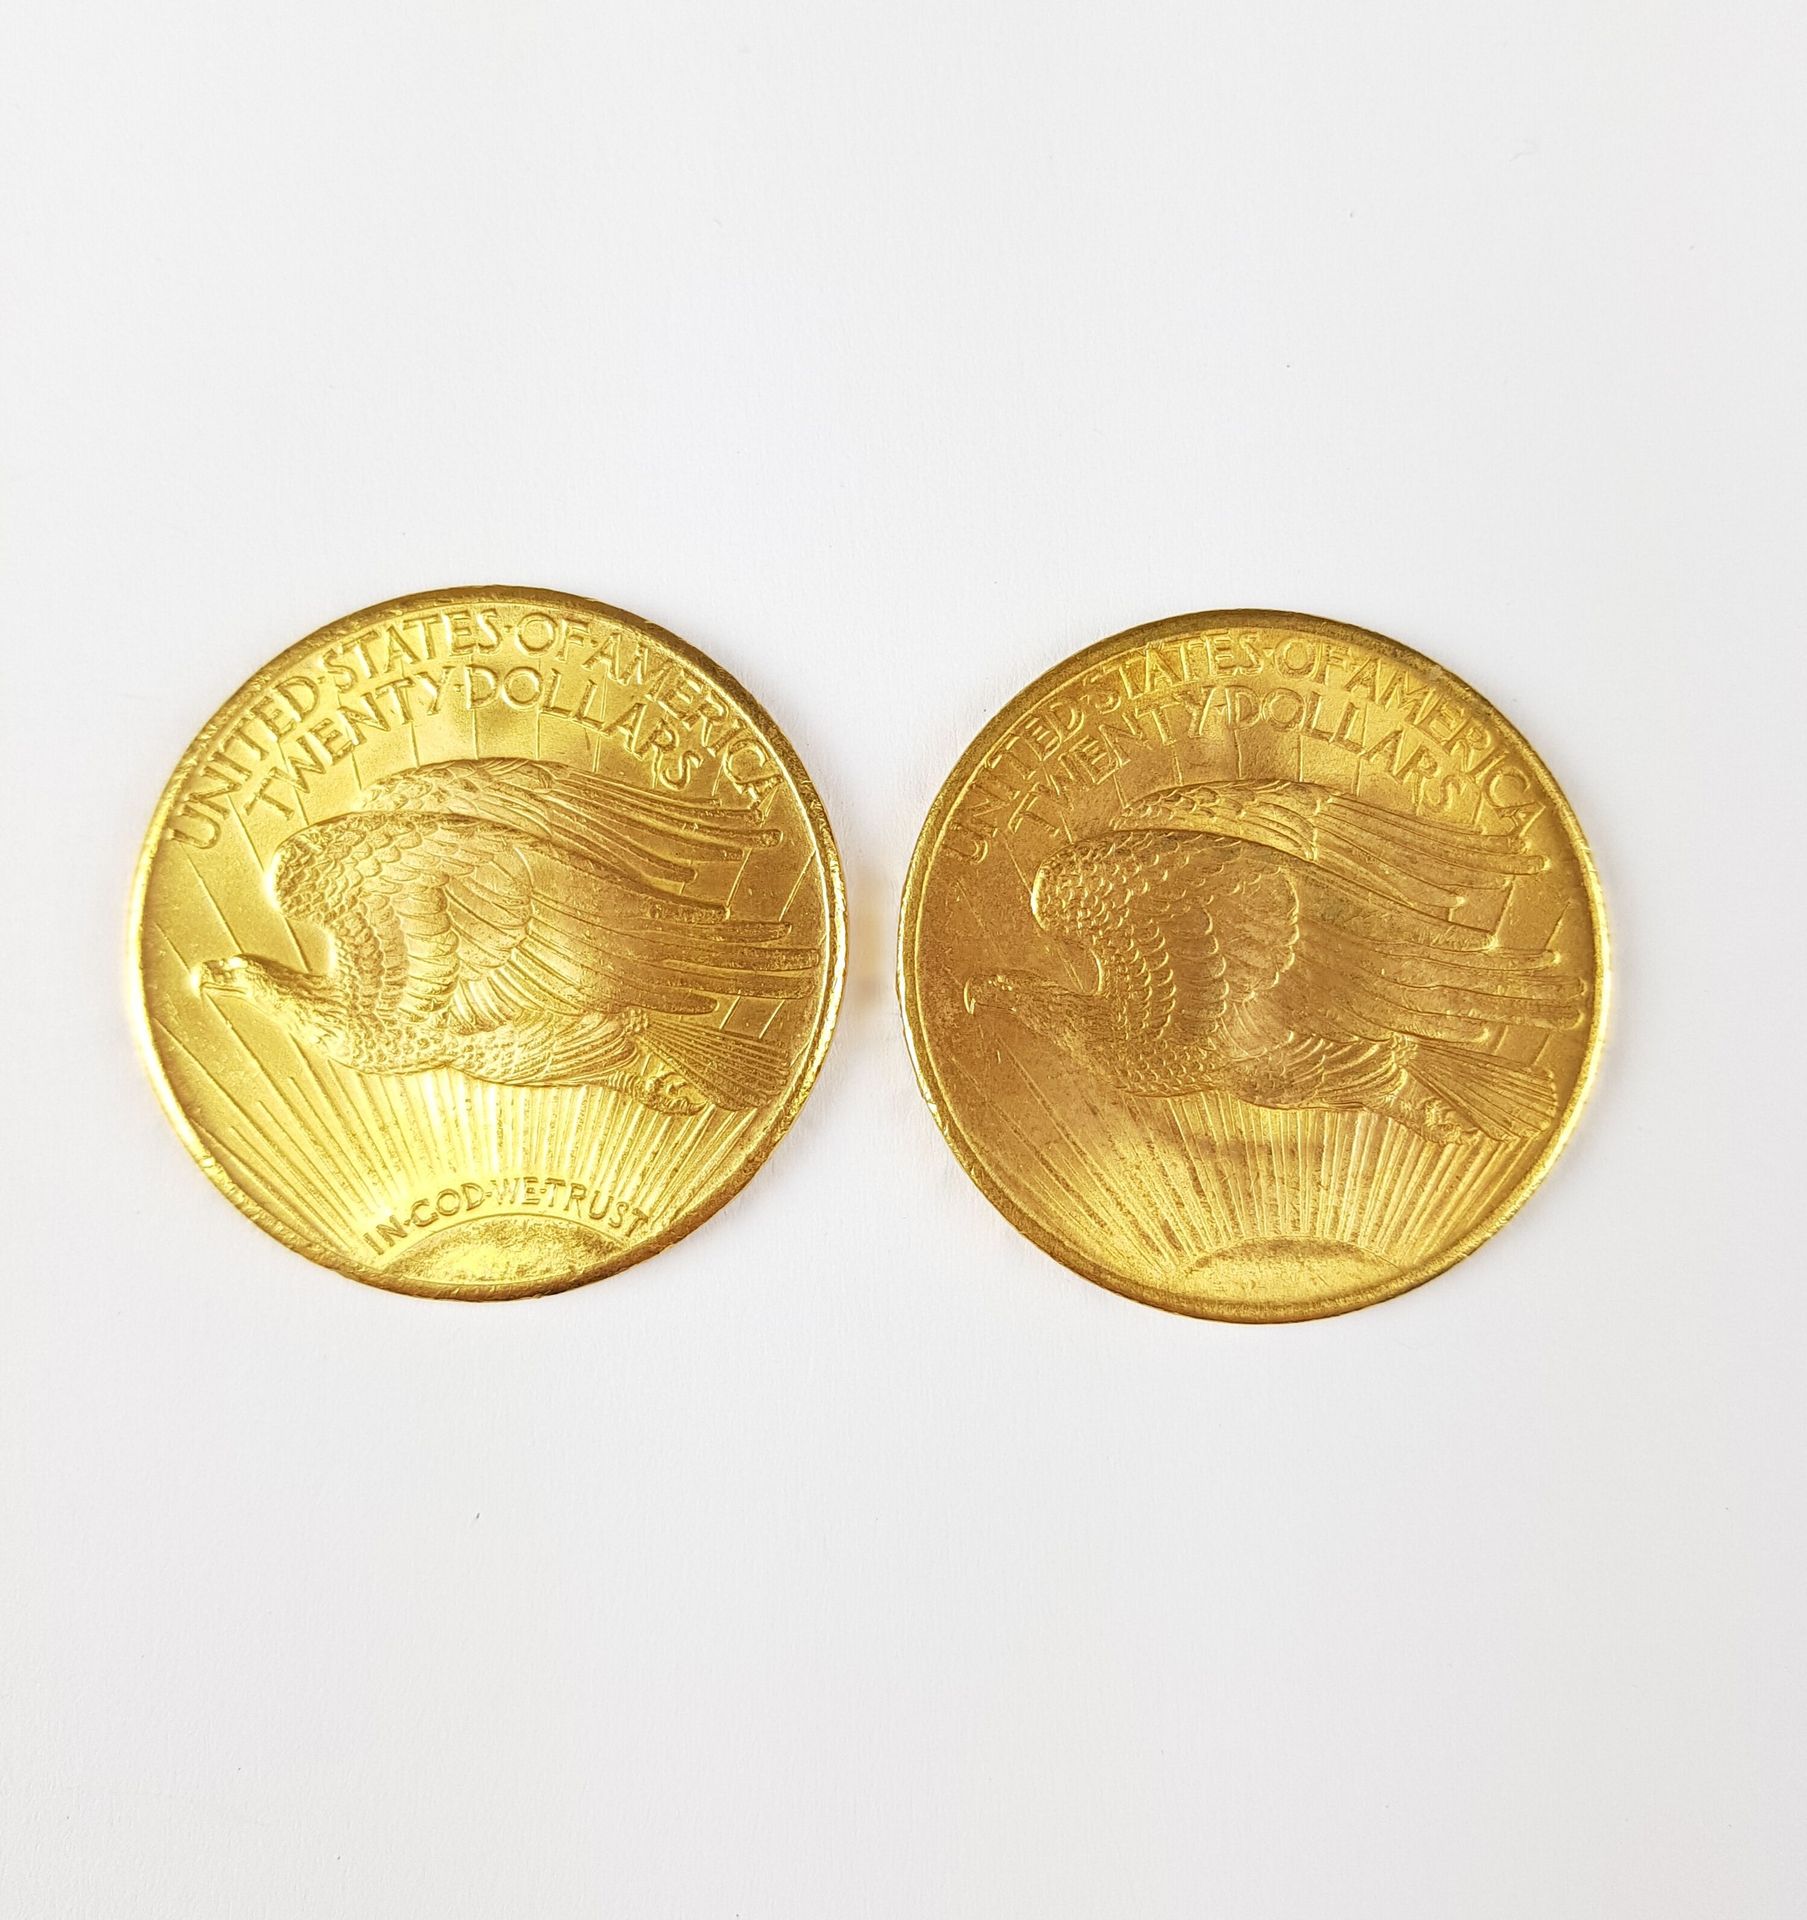 Null TWO $20 gold coins, 1908 and 1927
Total weight : 66,95 g